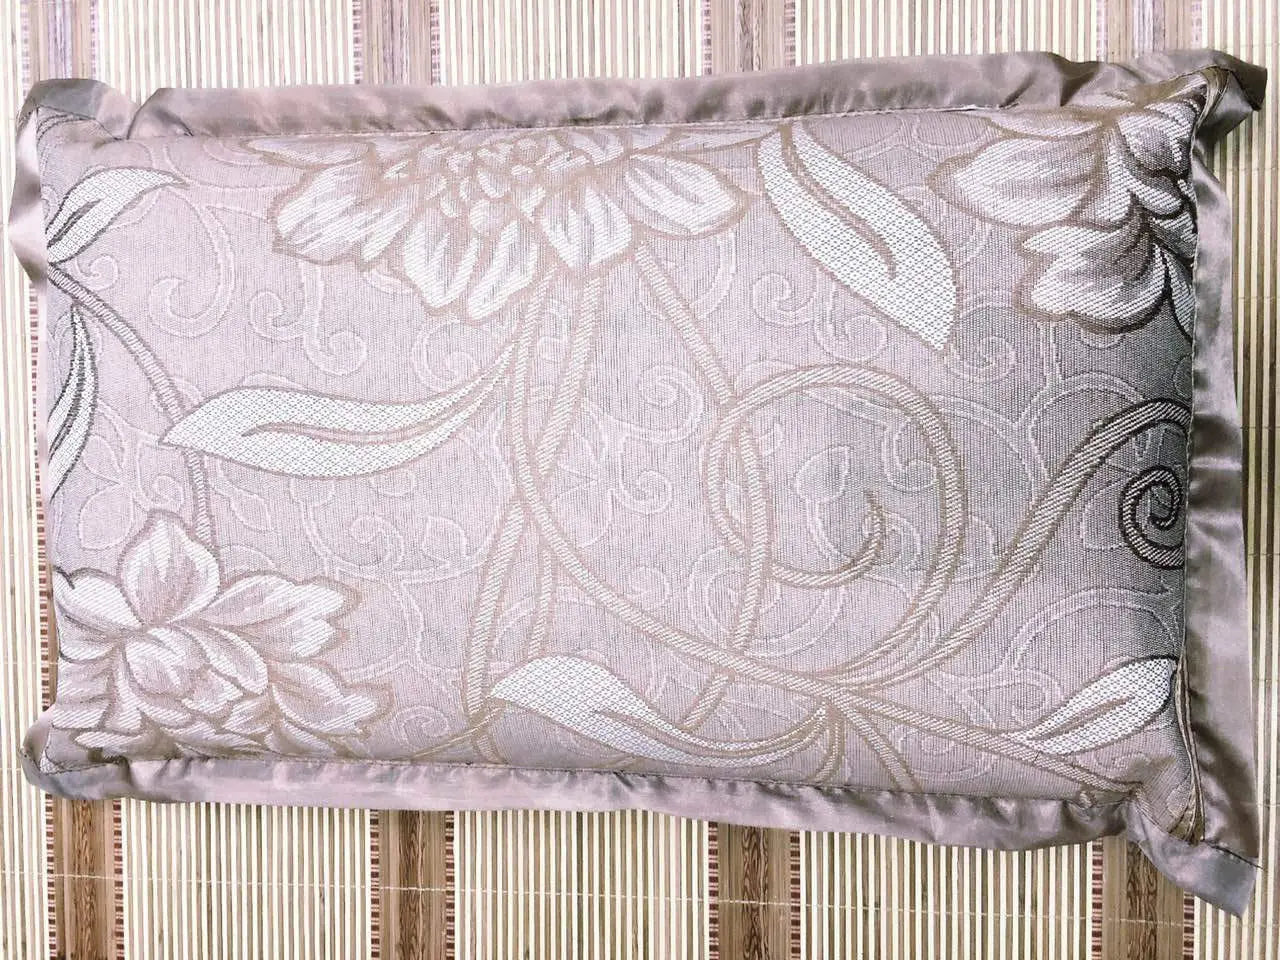 bamboo pillow cover Pillow Case bamboo mat Reversible full cover 竹枕套 双面 竹 冰丝 全包住 everythingbamboo